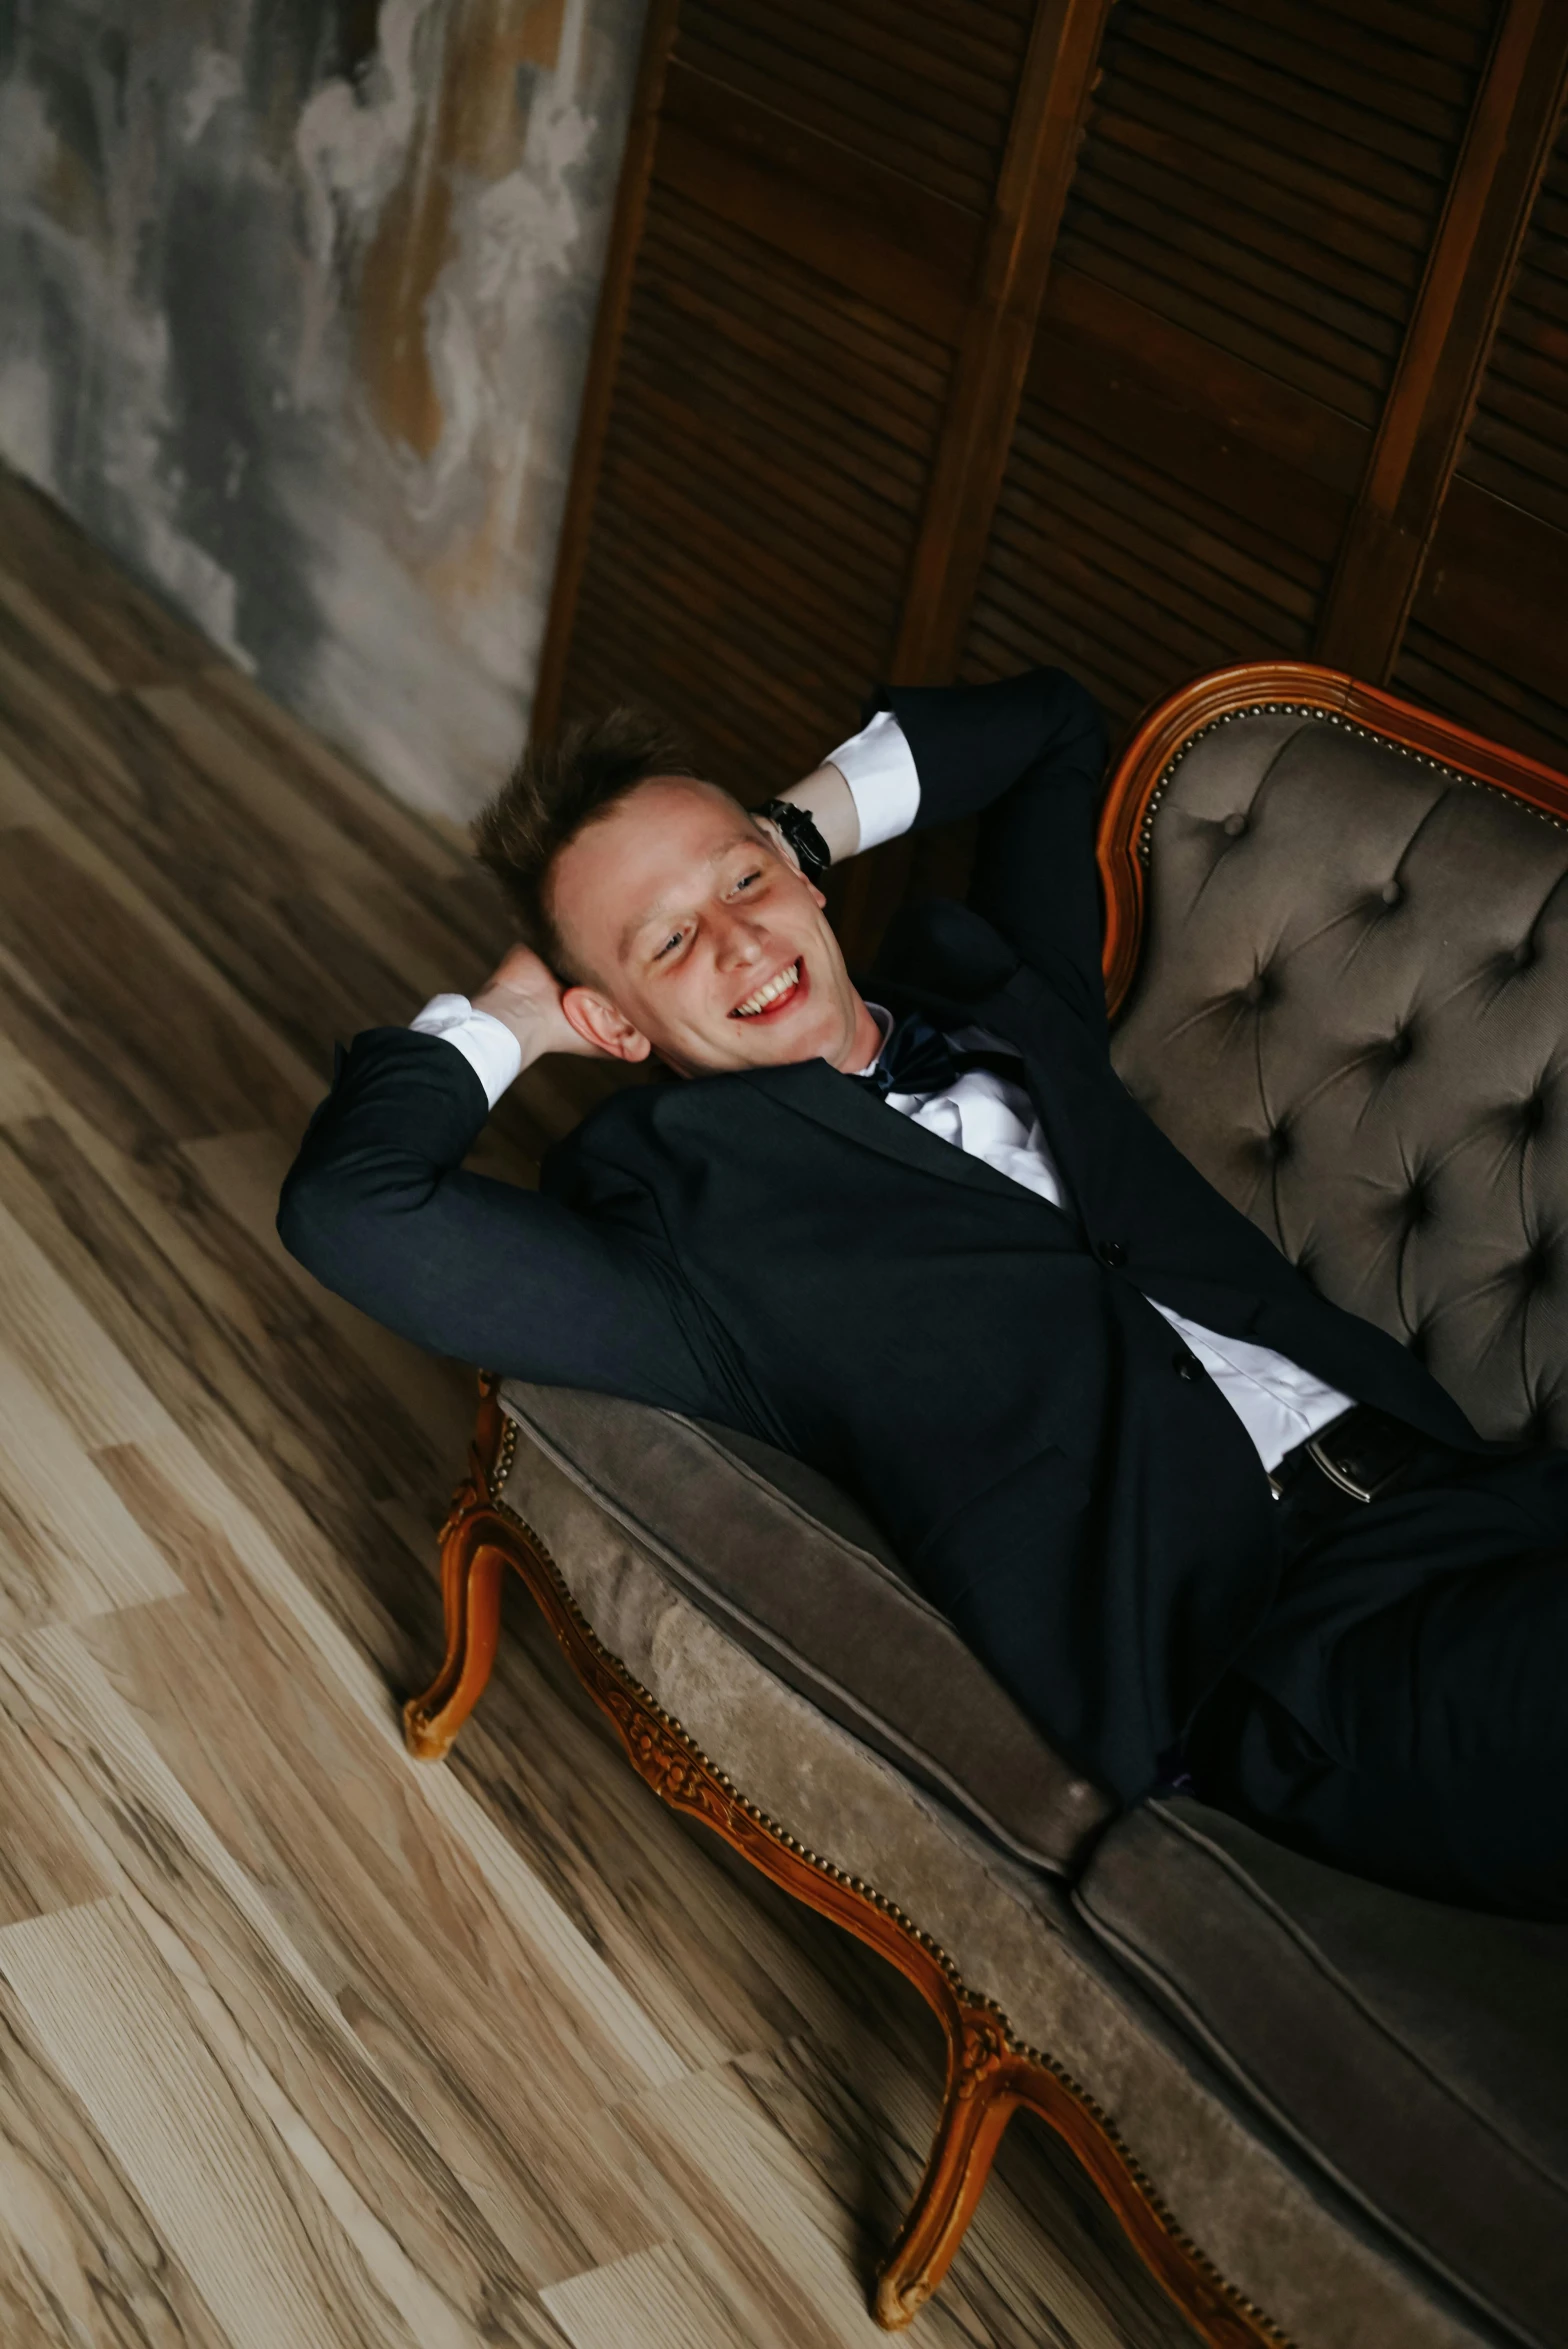 a man in a tuxedo laying on a couch, inspired by Dmitry Levitzky, pexels contest winner, baroque, smiling down from above, wearing causal black suits, wedding, satisfied pose